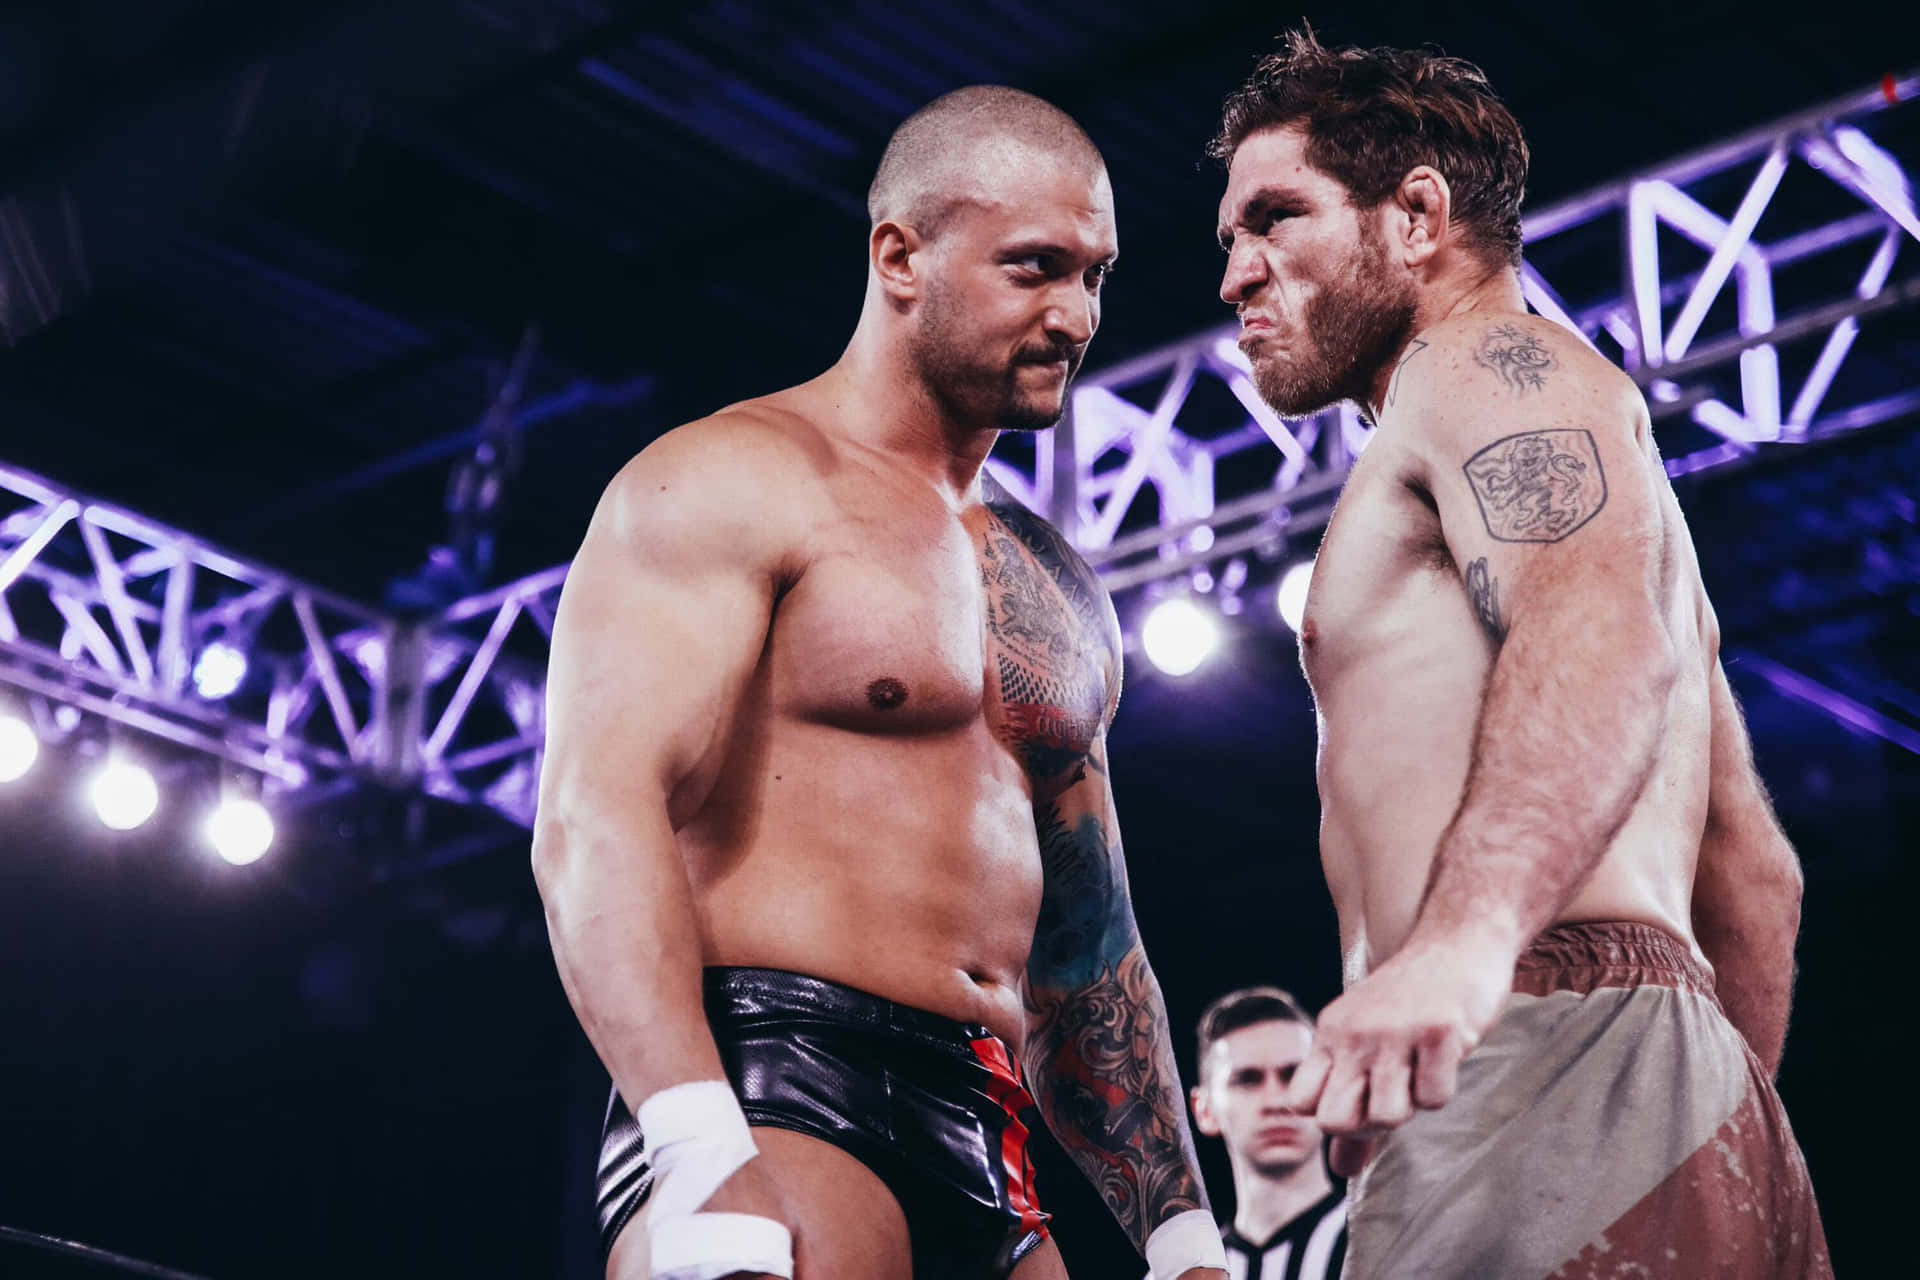 Captivating Showdown between Killer Kross and Tom Lawlor at MLW Fusion Wallpaper